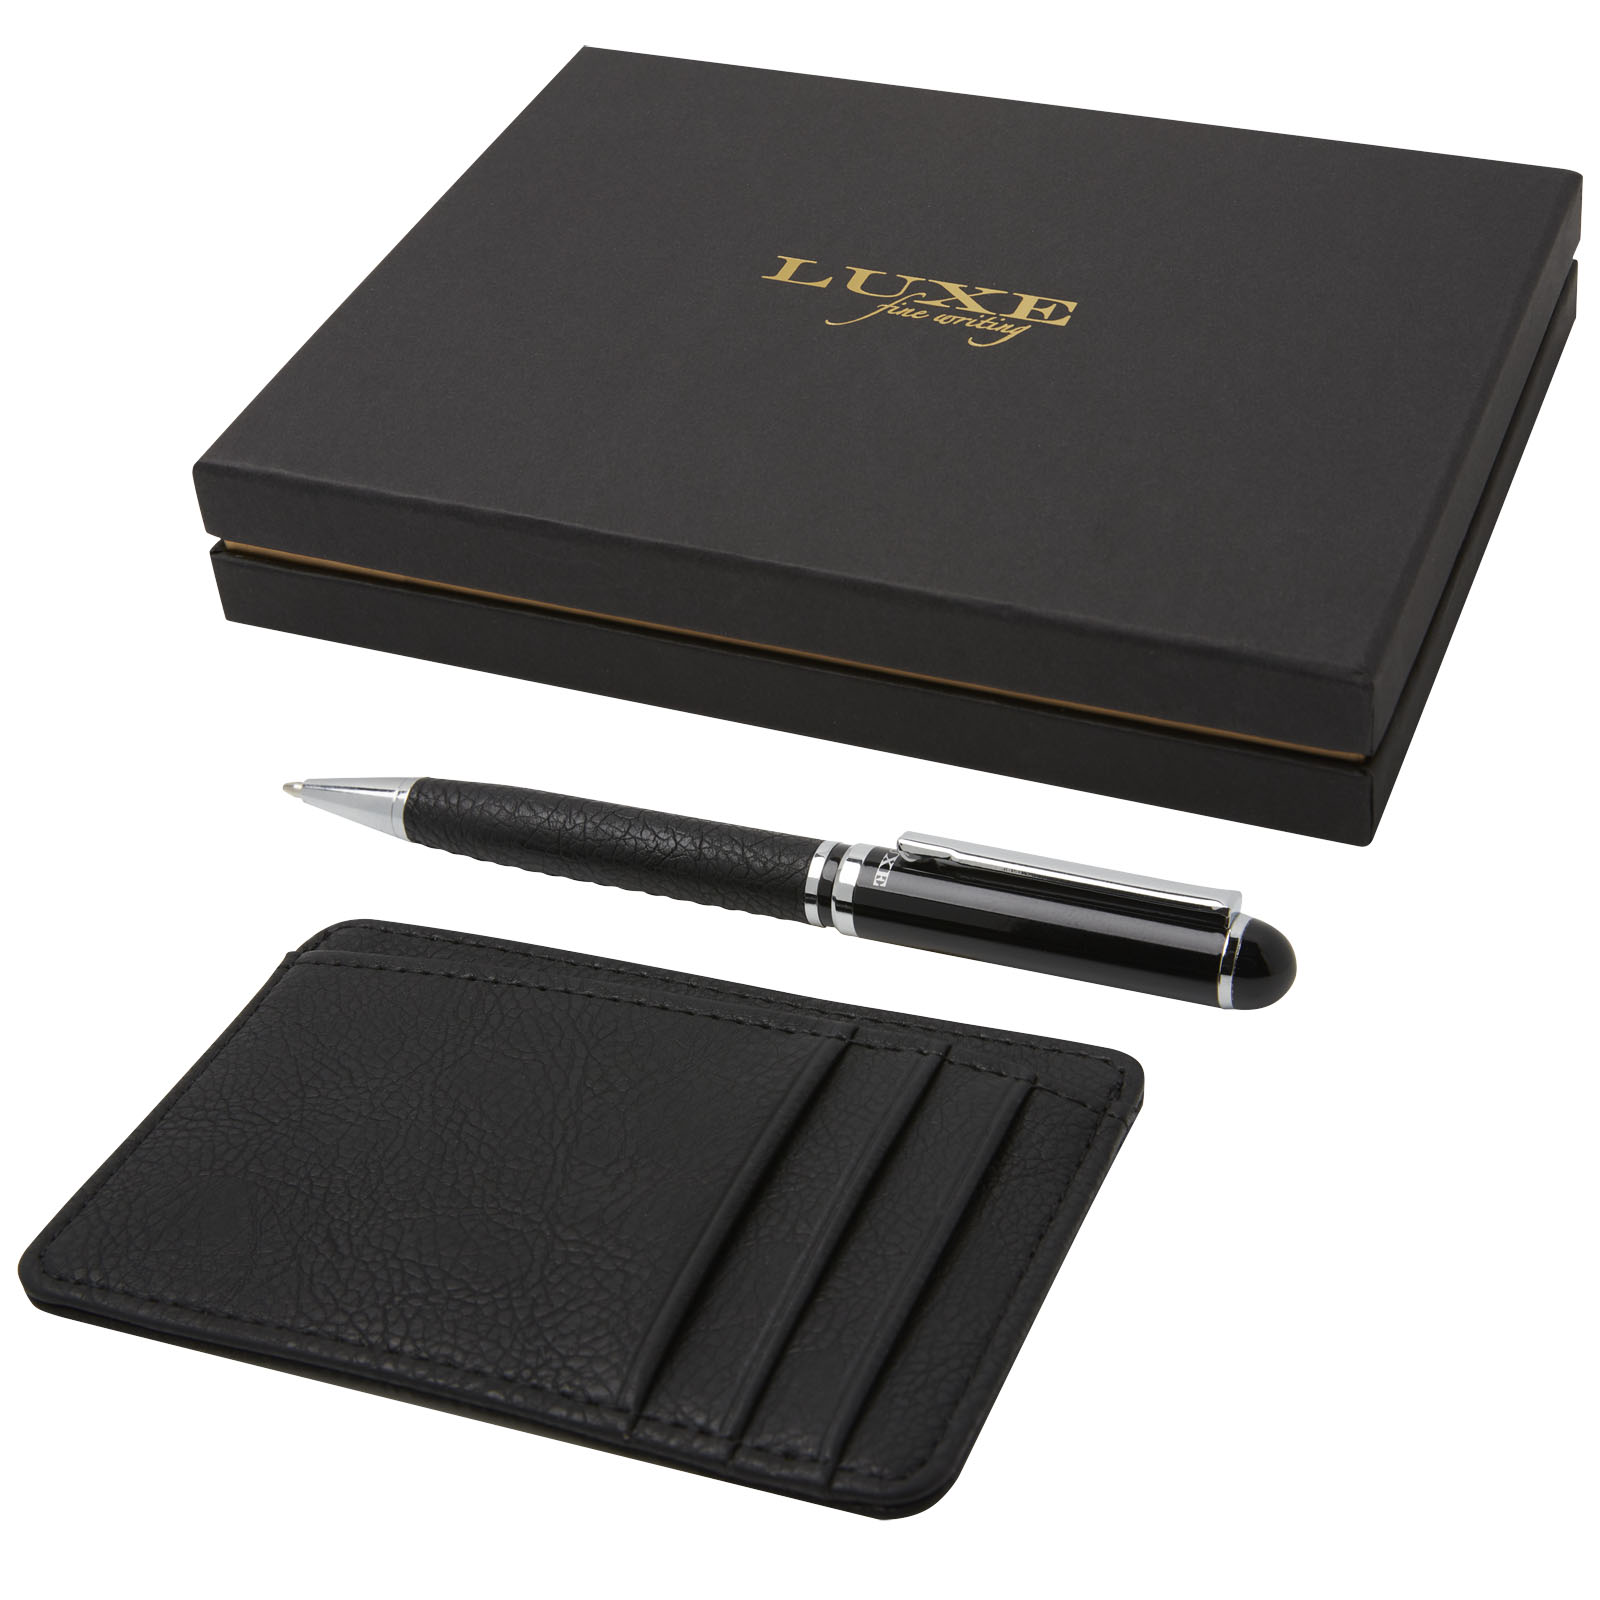 Advertising Gift sets - Encore ballpoint pen and wallet gift set